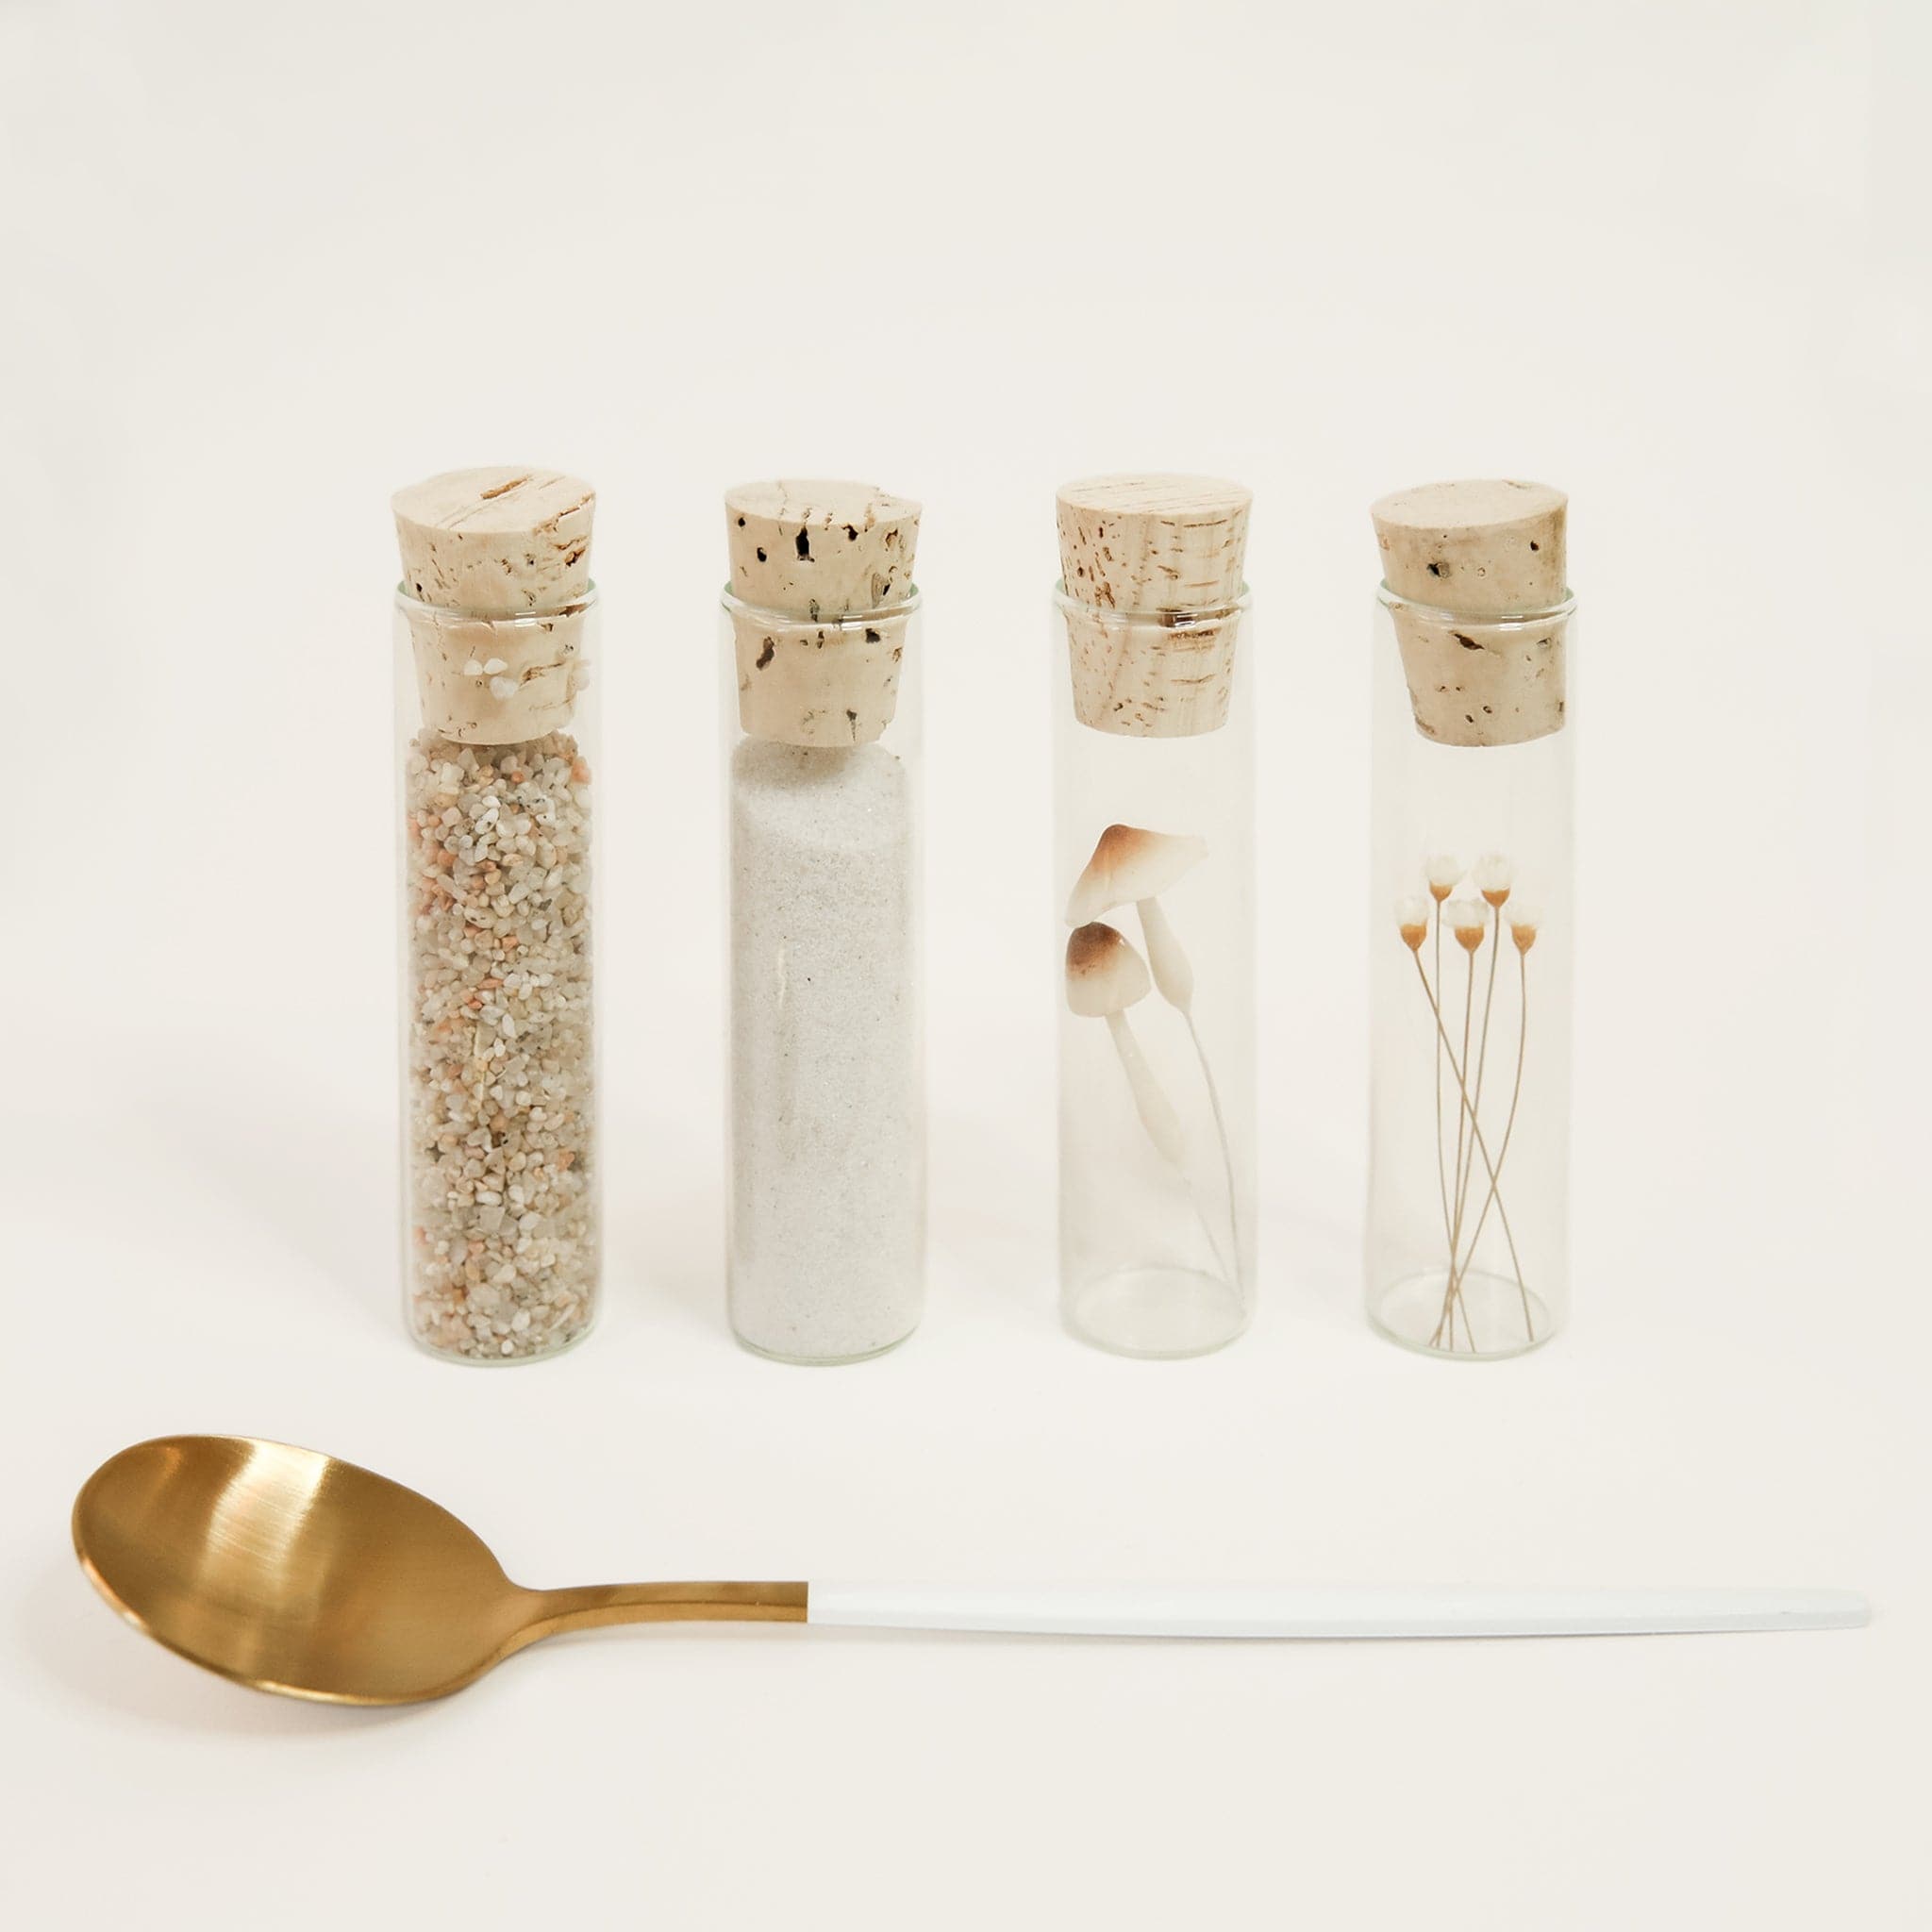 Four glass vials filled with a variety of neutral toned sand, pebbles, mushrooms and dried florals. Each vial is secured closed with light cork. A golden spoon with a long white handle is positioned in front of the vials. 